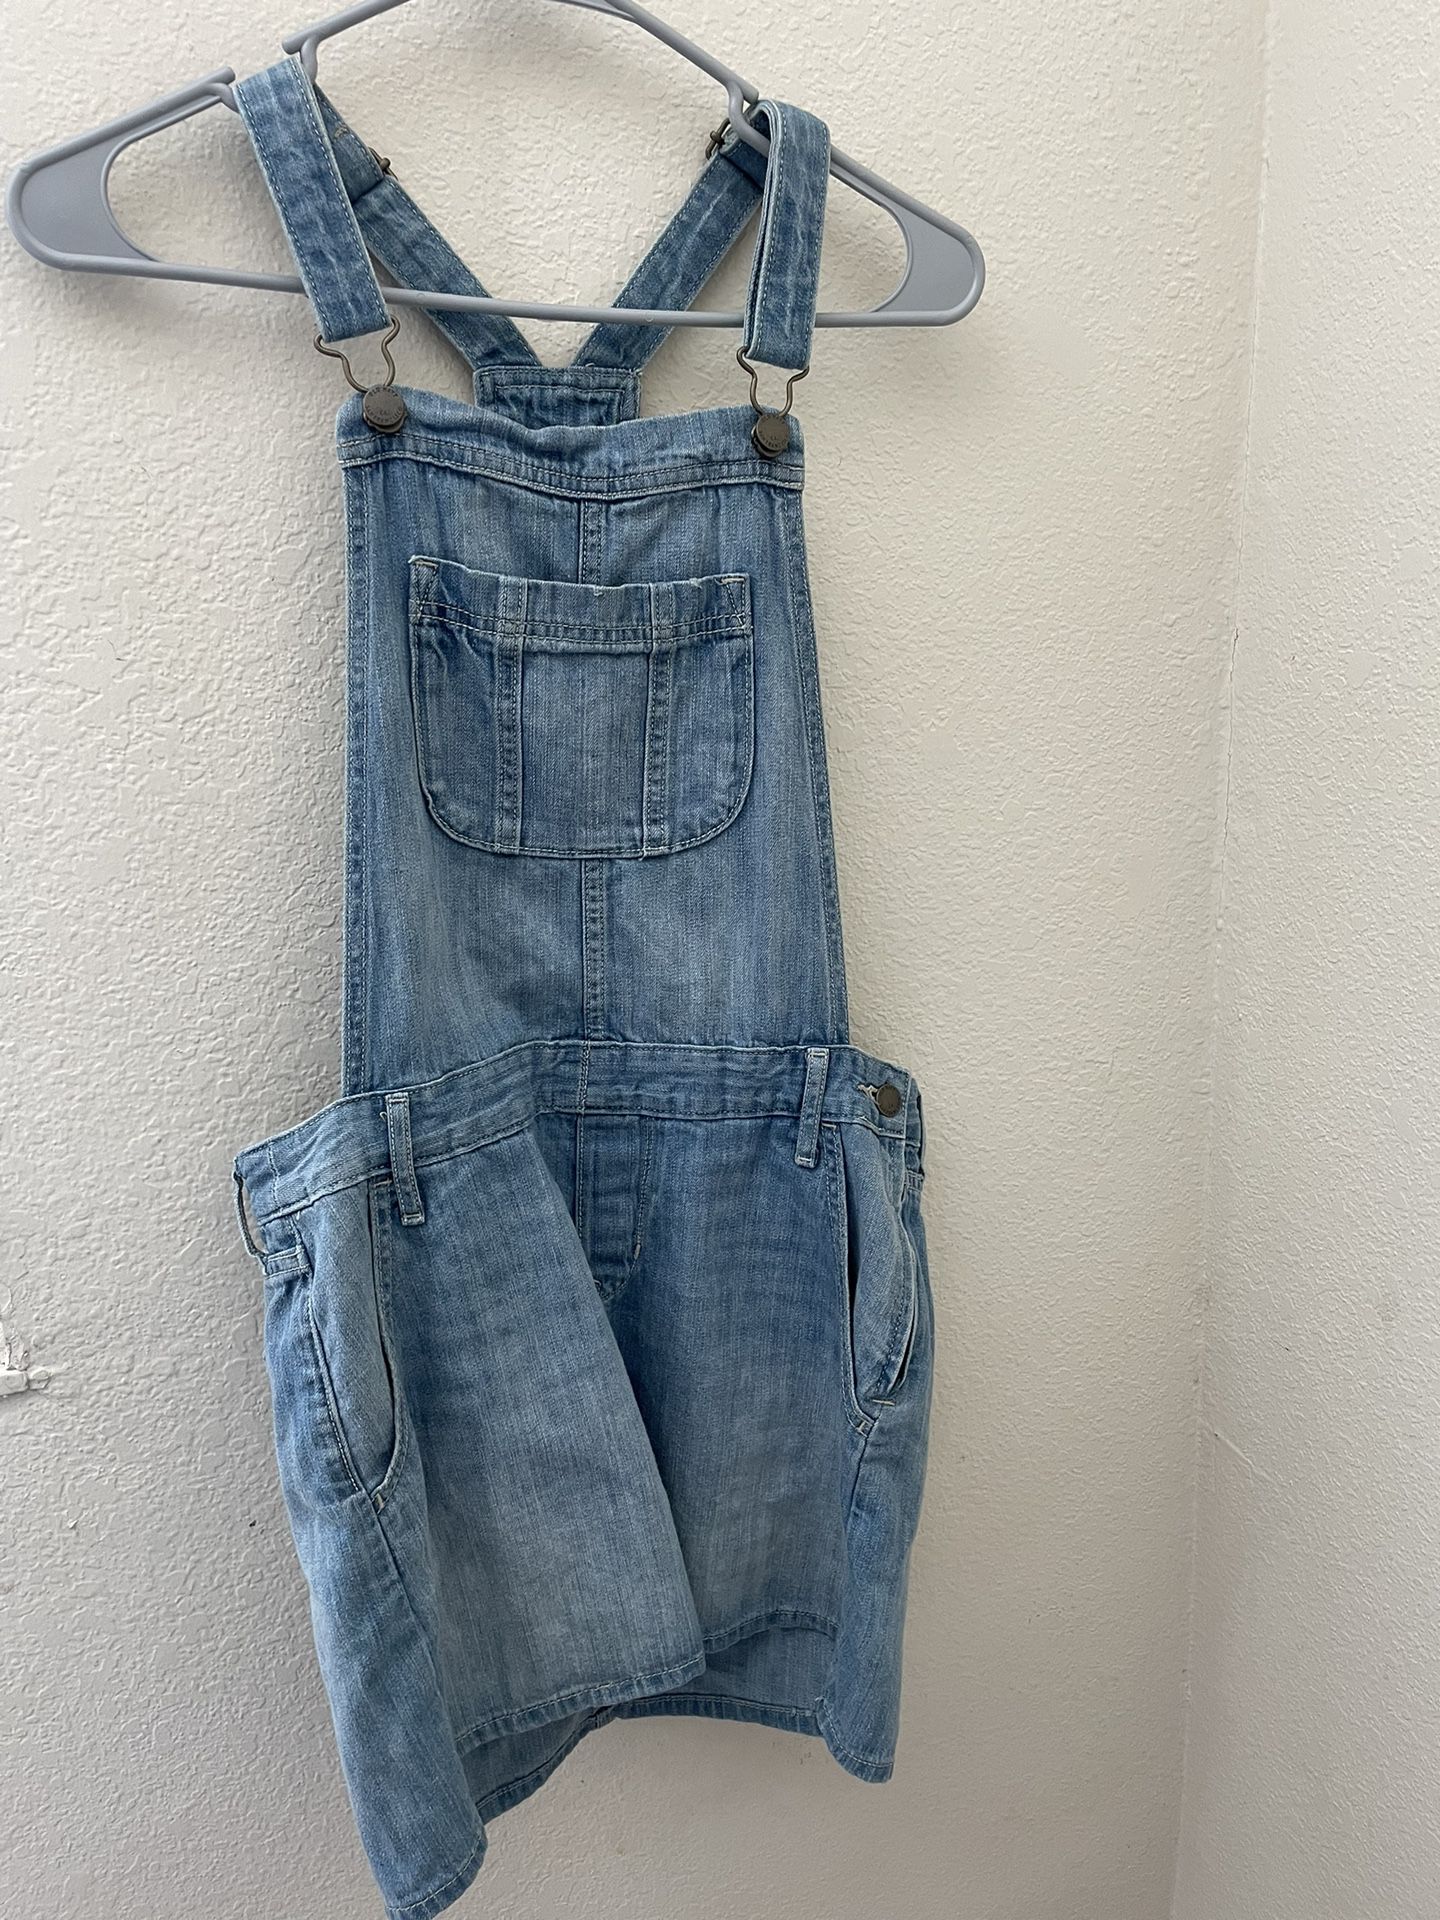 Old Navy Overall Dress